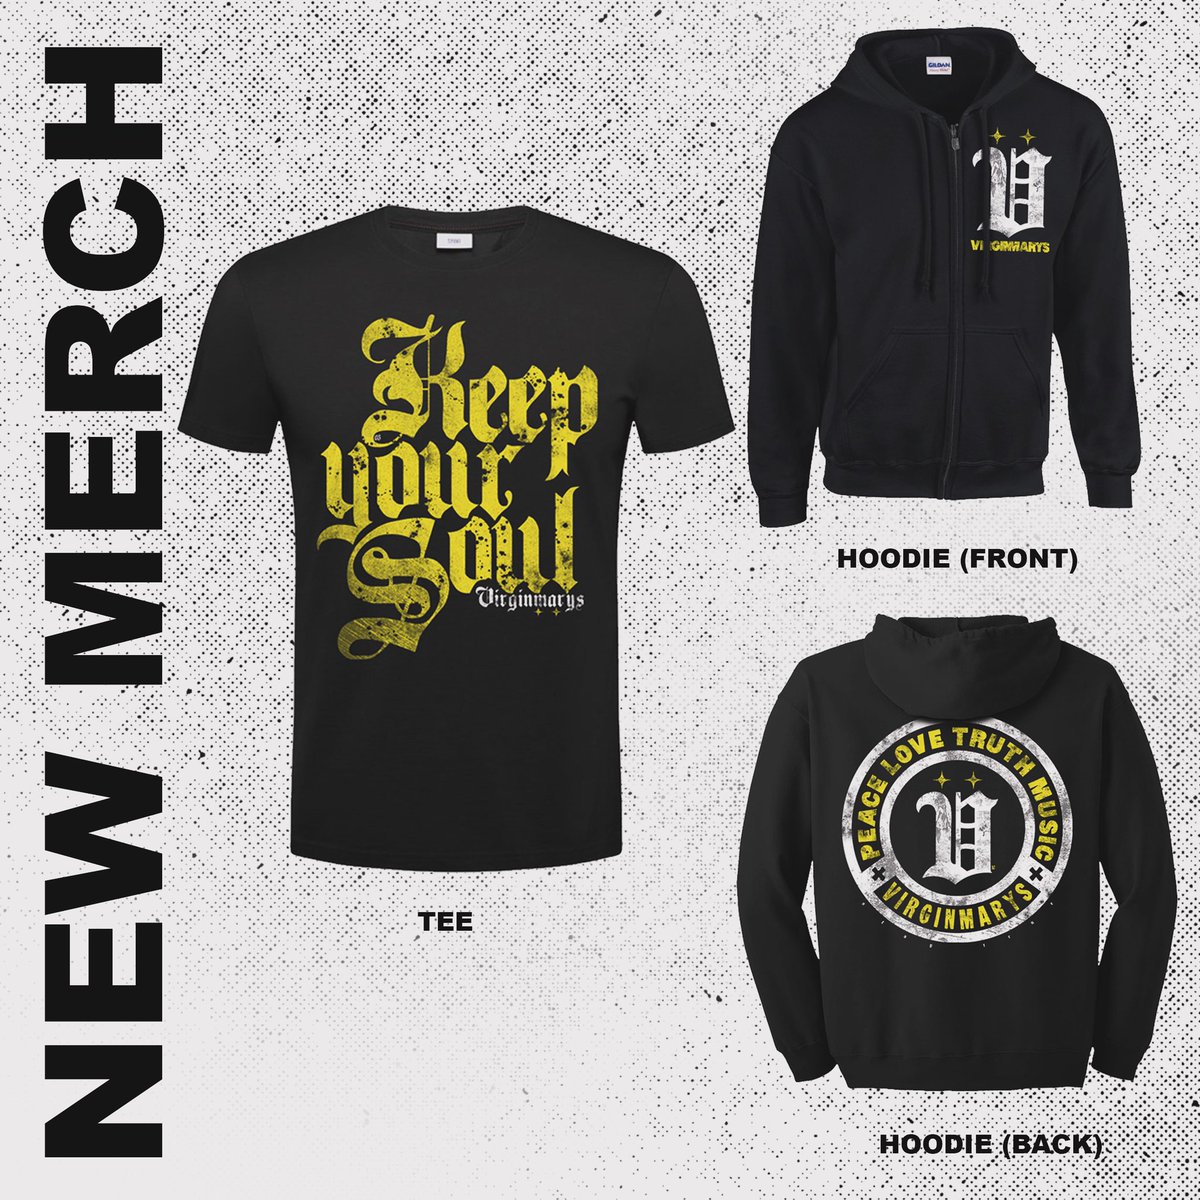 ⚡️CHRISTMAS MERCH FOR SALE TONIGHT!⚡️ What do we reckon?? 👍 / 👎